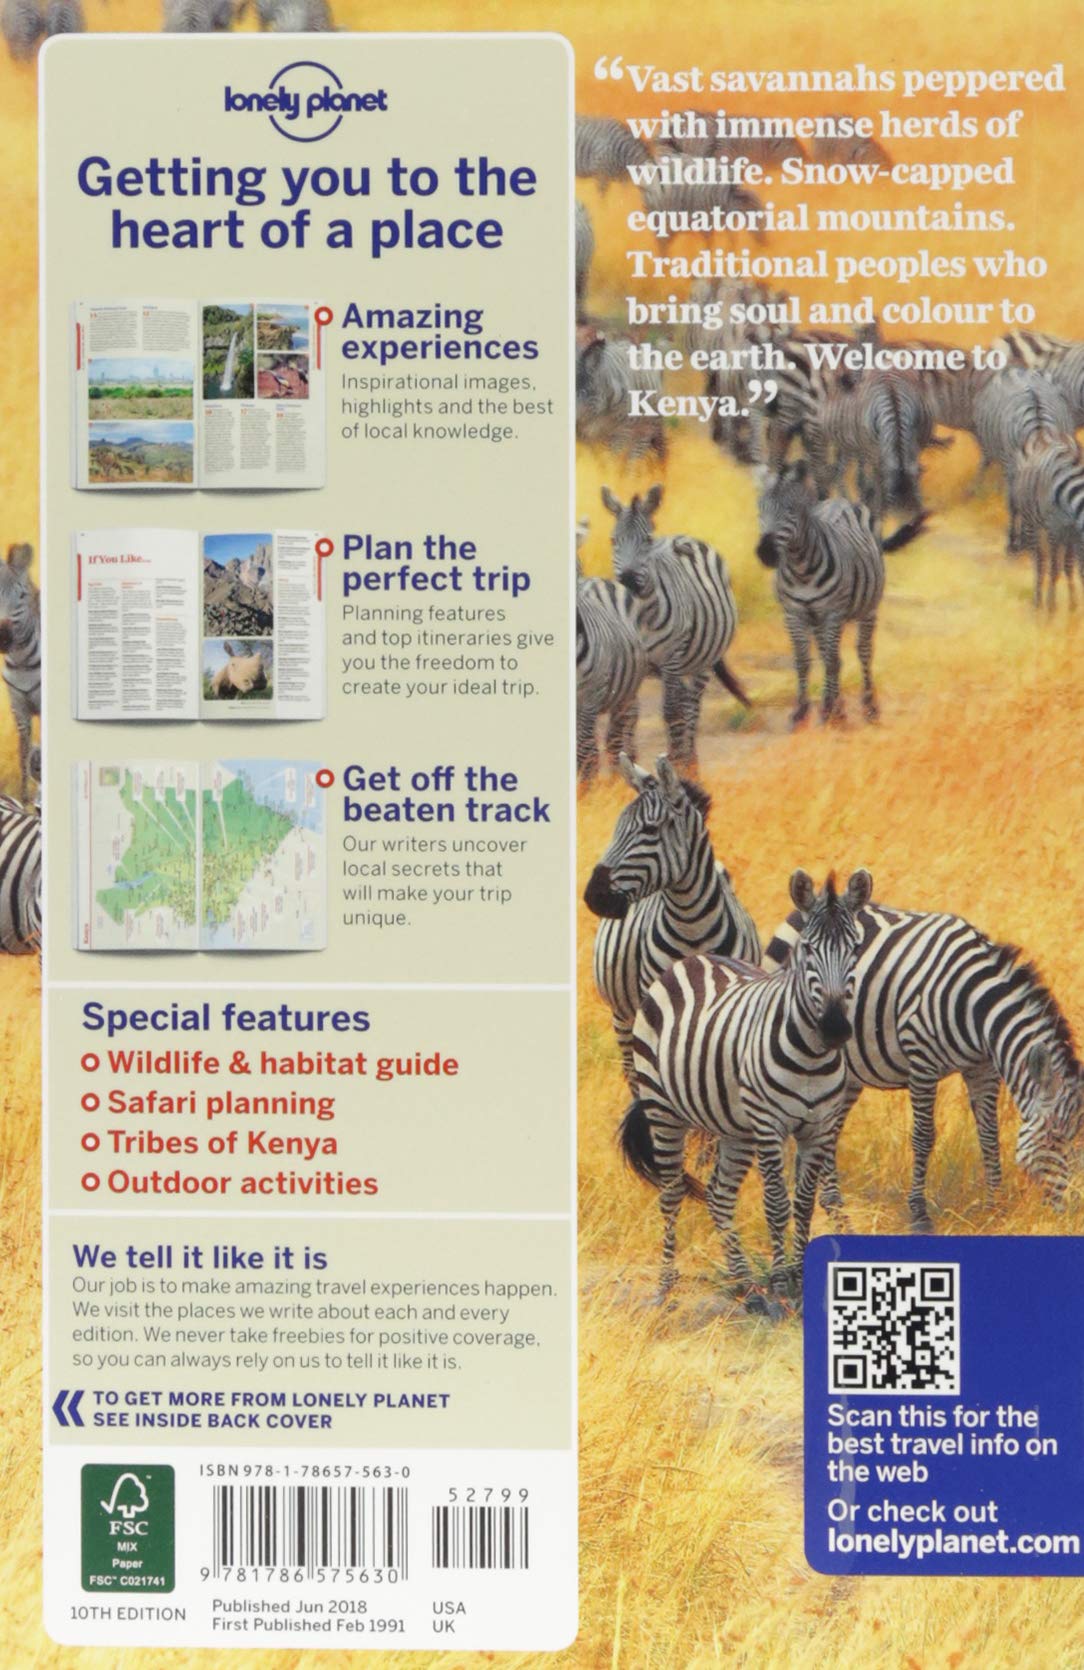 Lonely　Planet　Travel　Guide　Kenya　Explore　Africa